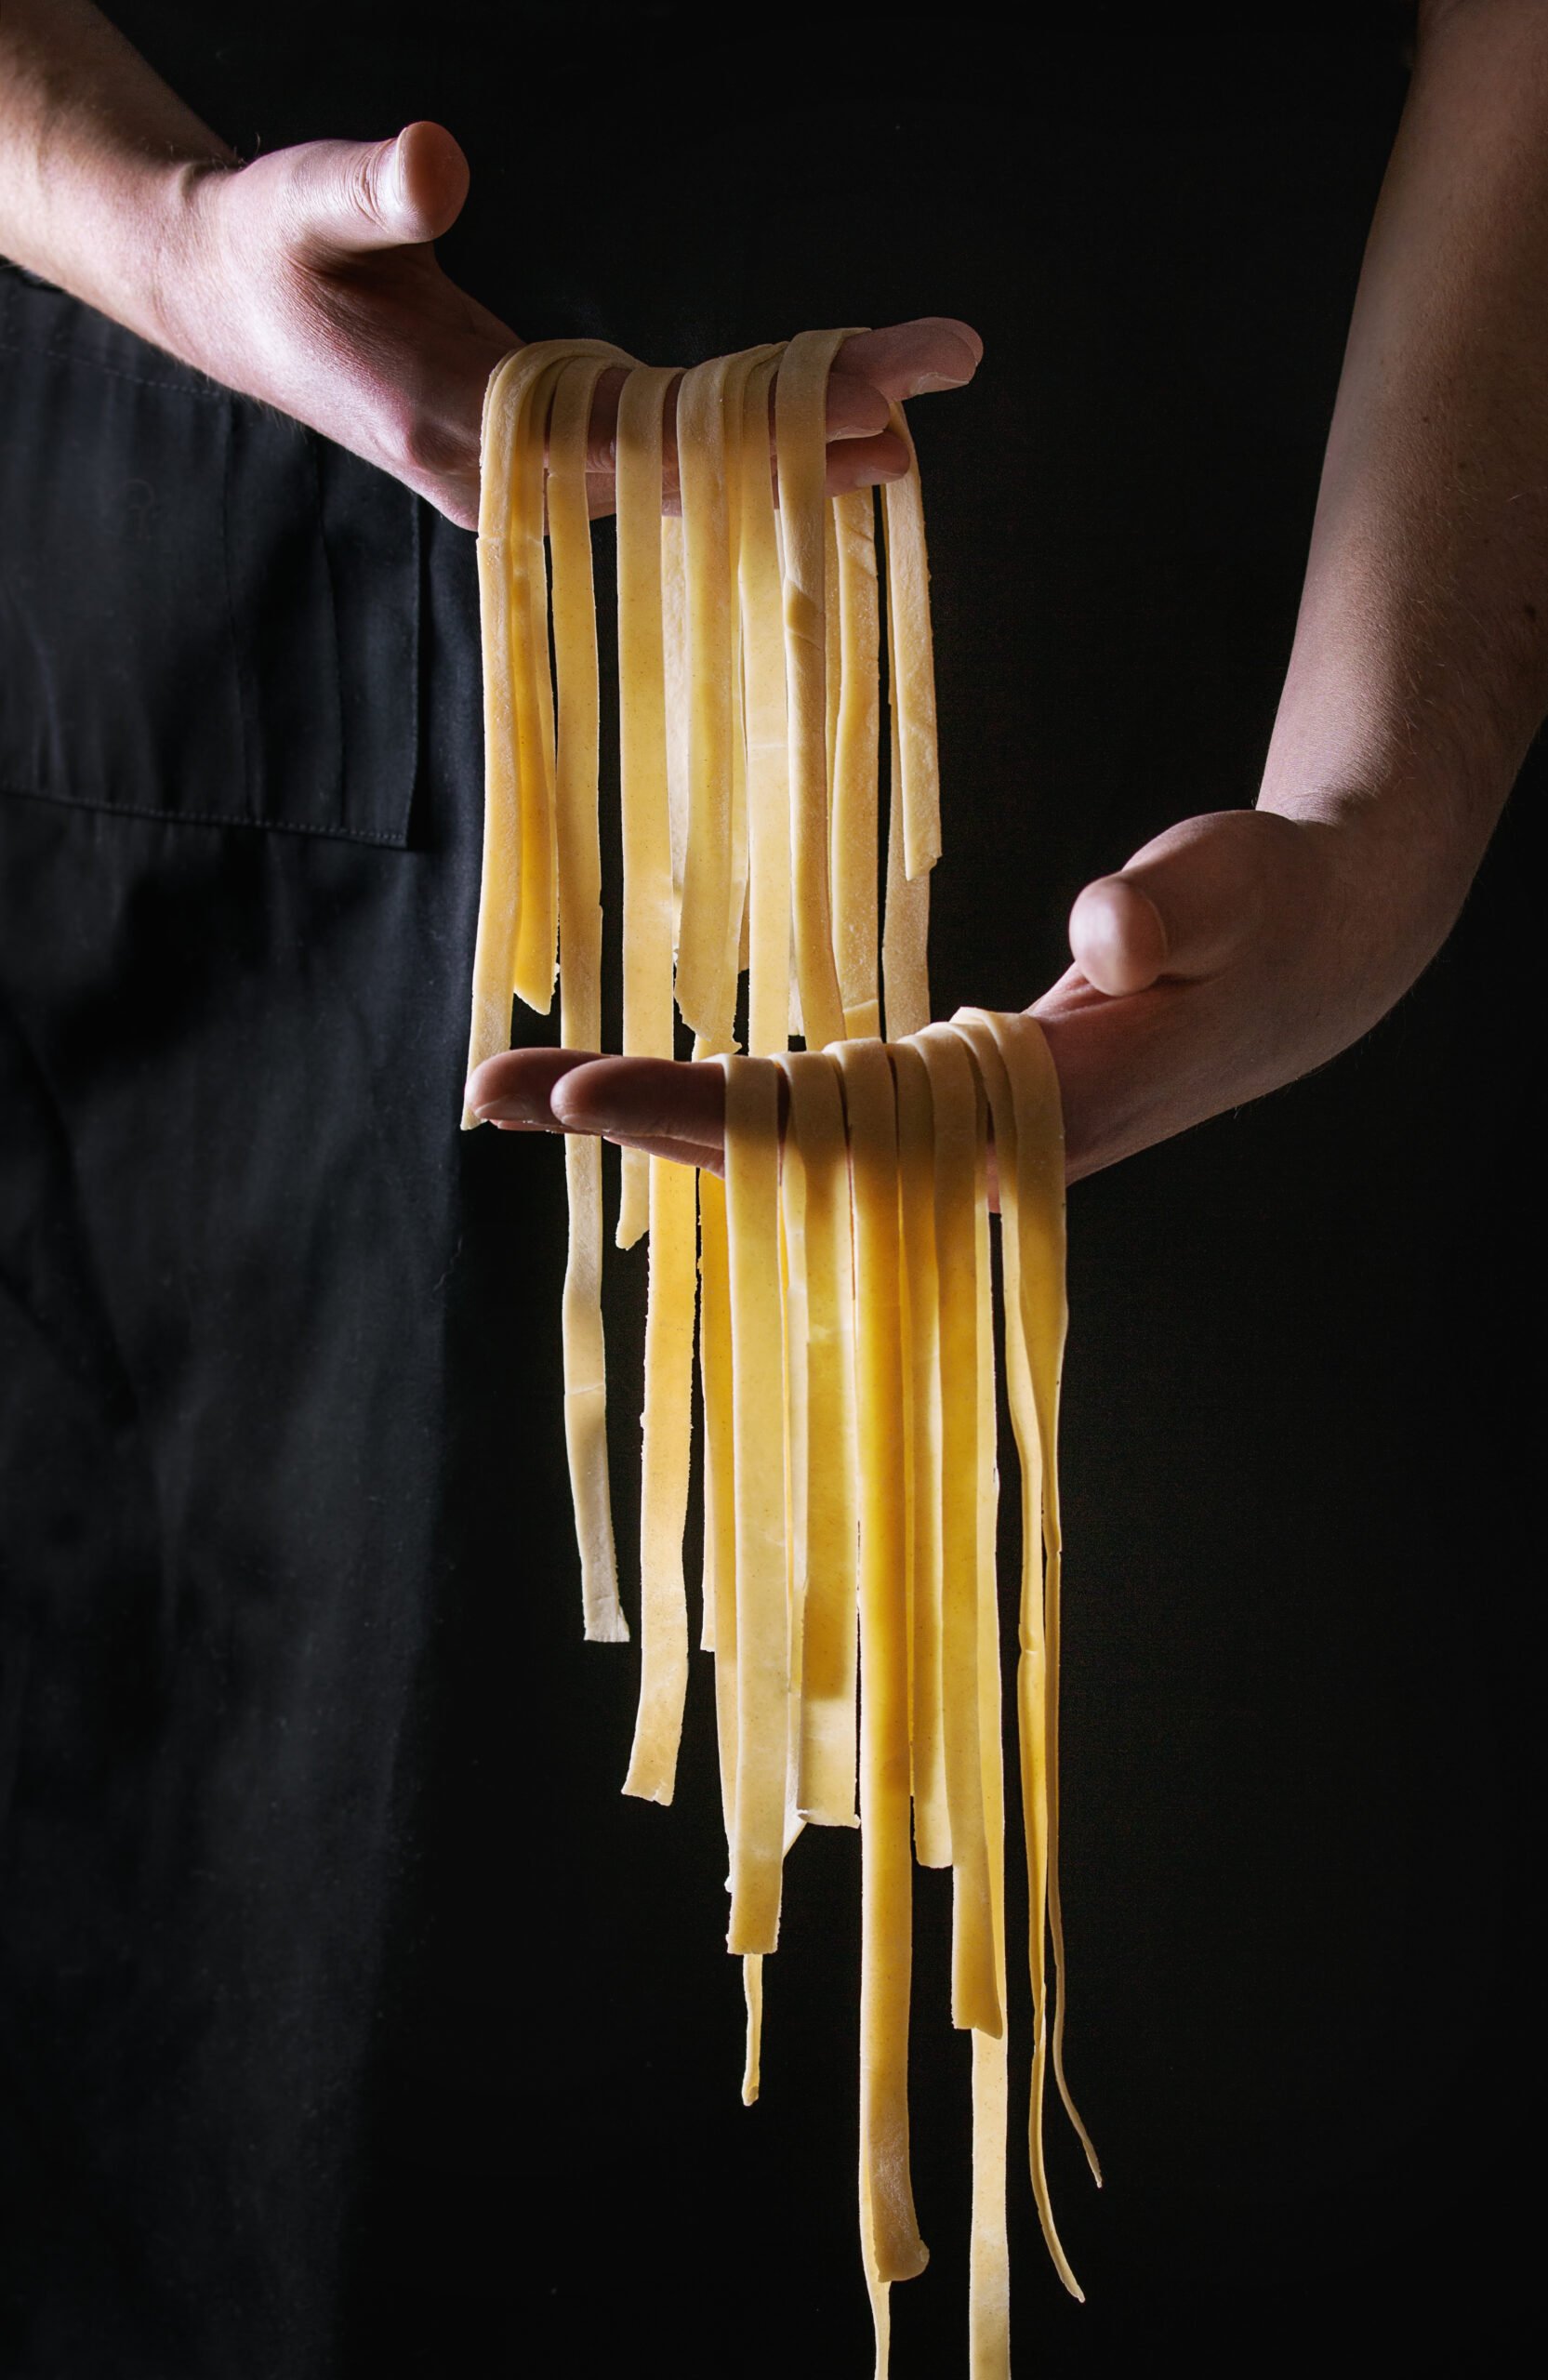 Culinary Escapades - Fresh raw uncooked homemade pasta tagliatelle in man's hands over black apron as background.